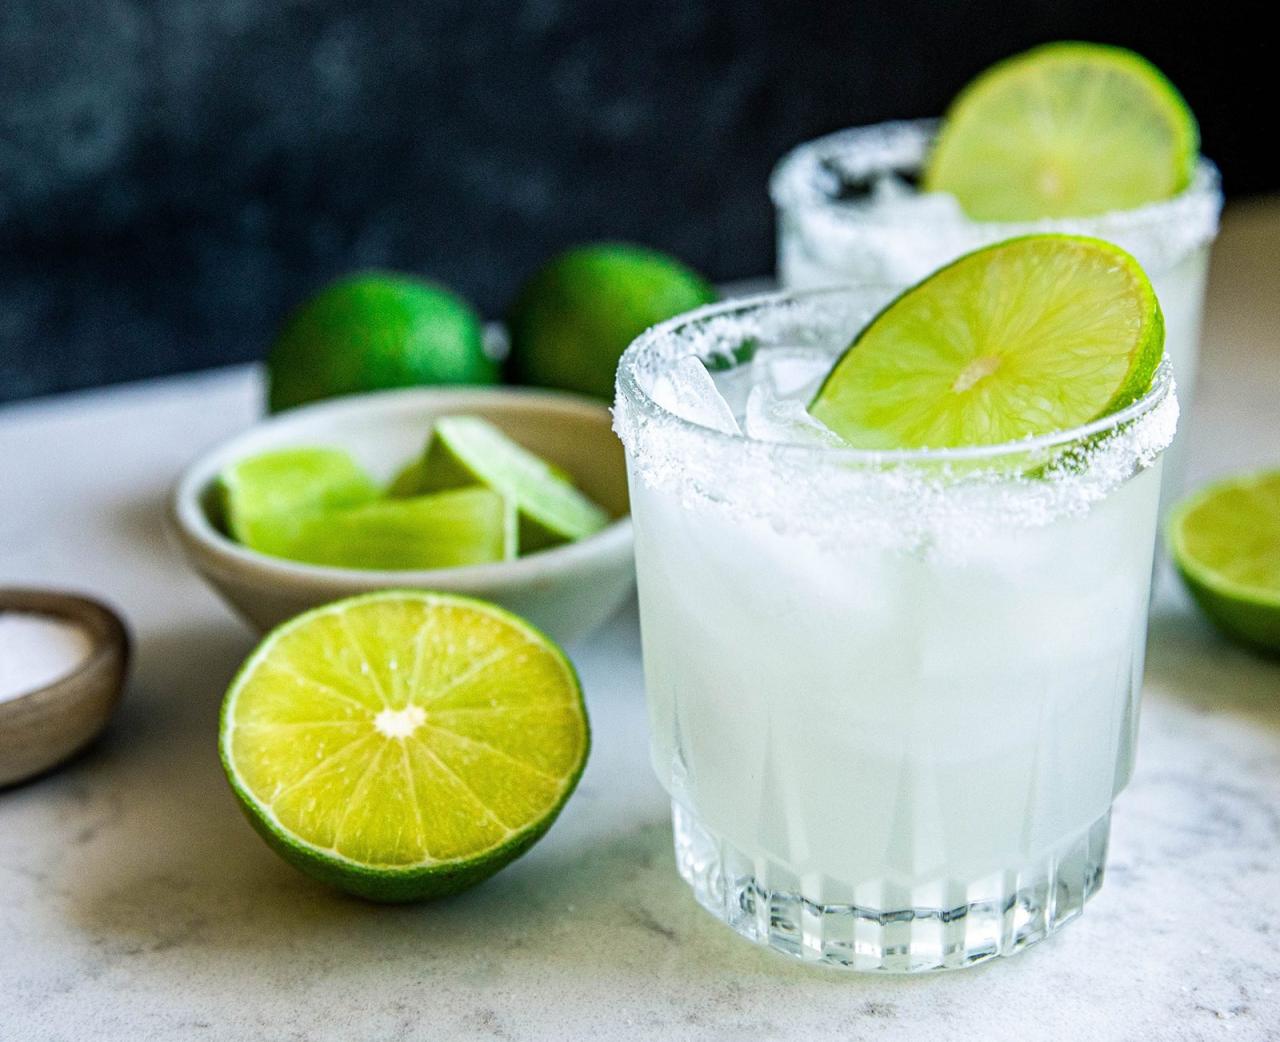 How To Make A Margarita